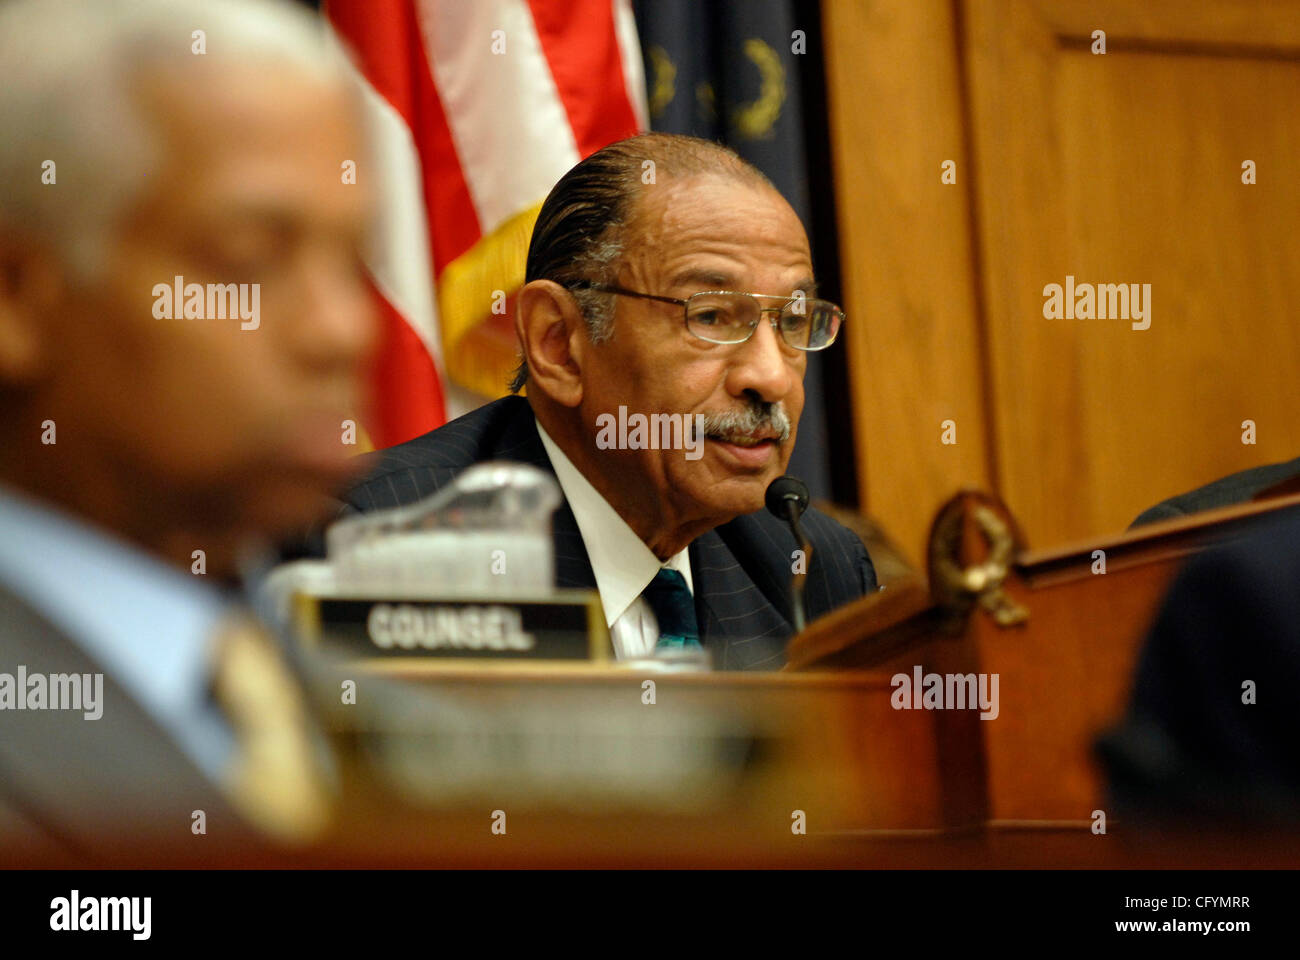 May 23, 2007 - Washington, DC, USA - House Judiciary committee chairman JOHN CONYERS (D-MI) questions Monica Goodling about her role in the firing of US attorneys in late 2006 and early 2007. Goodling denied taken a major part in the scandal.   (Credit Image: © Mark Murrmann/ZUMA Press) Stock Photo